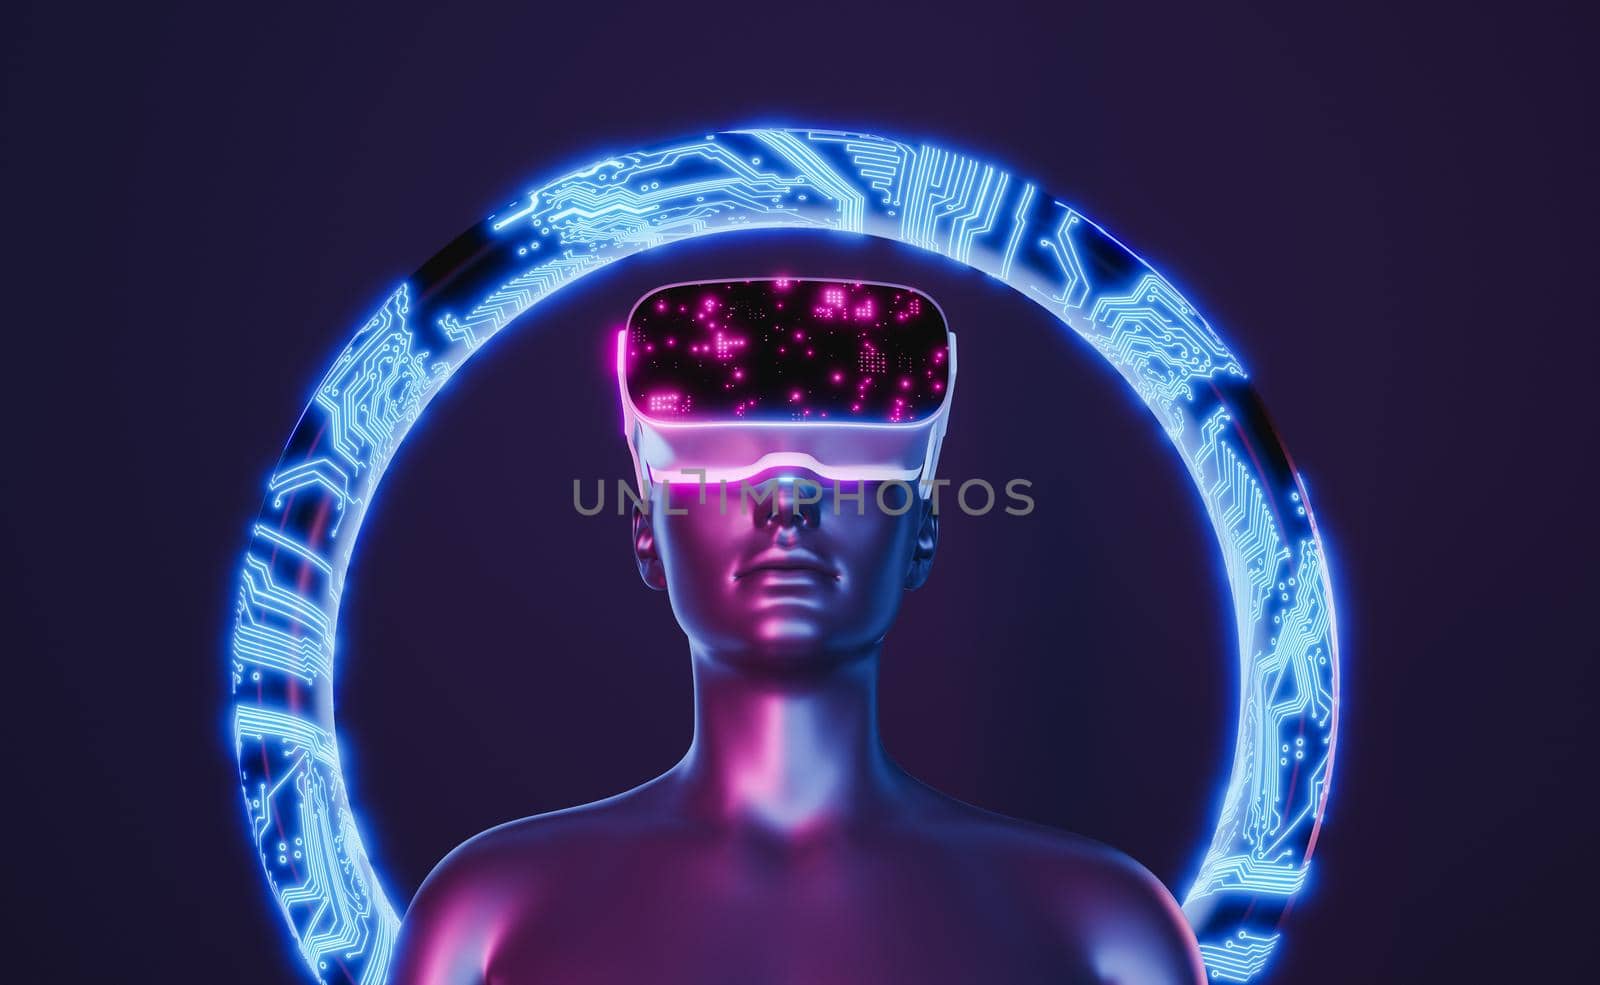 3d girl with virtual reality glasses and an electronic hoop behind. neon lights. futuristic concept of virtual reality, video games, technology, metaverse and crypto. 3d rendering